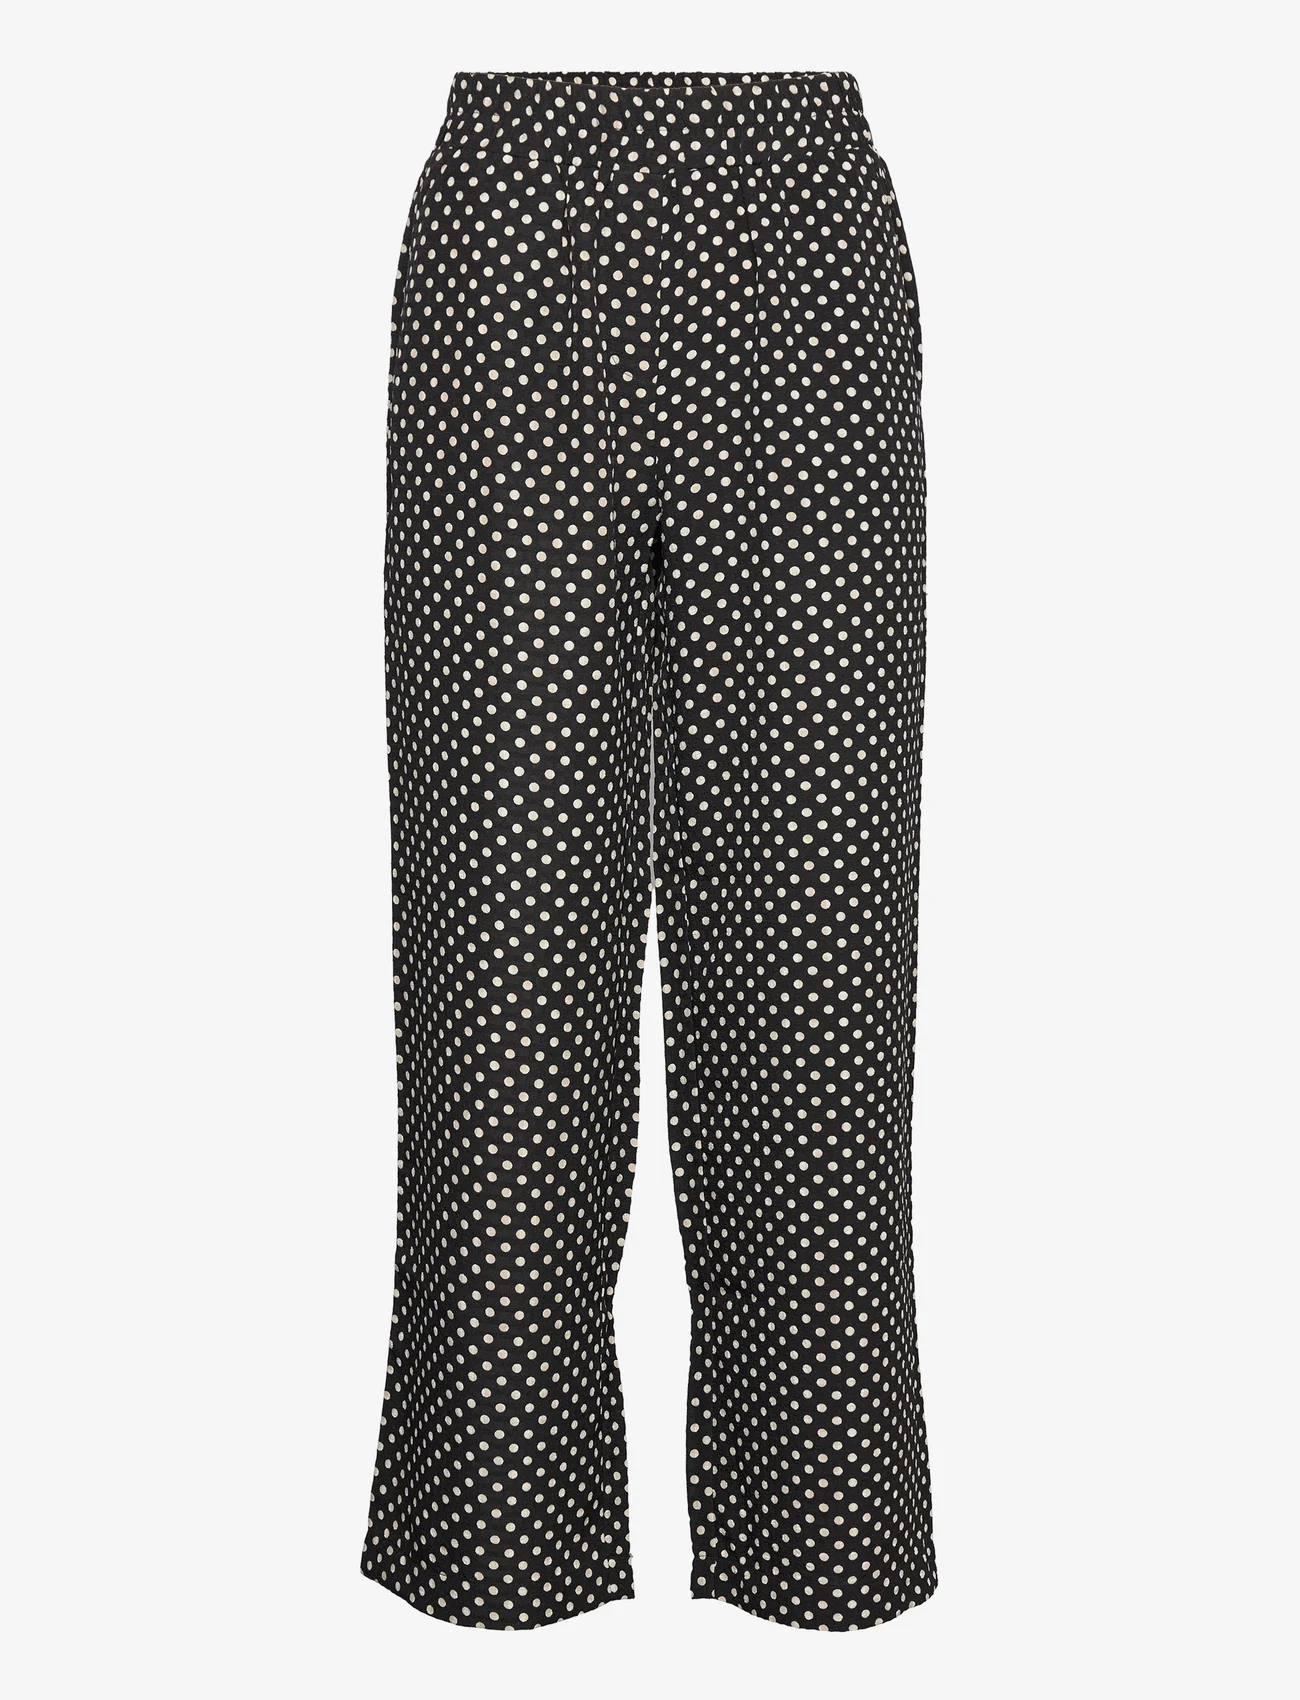 A-View - Oda pant - rette bukser - black with dots - 0